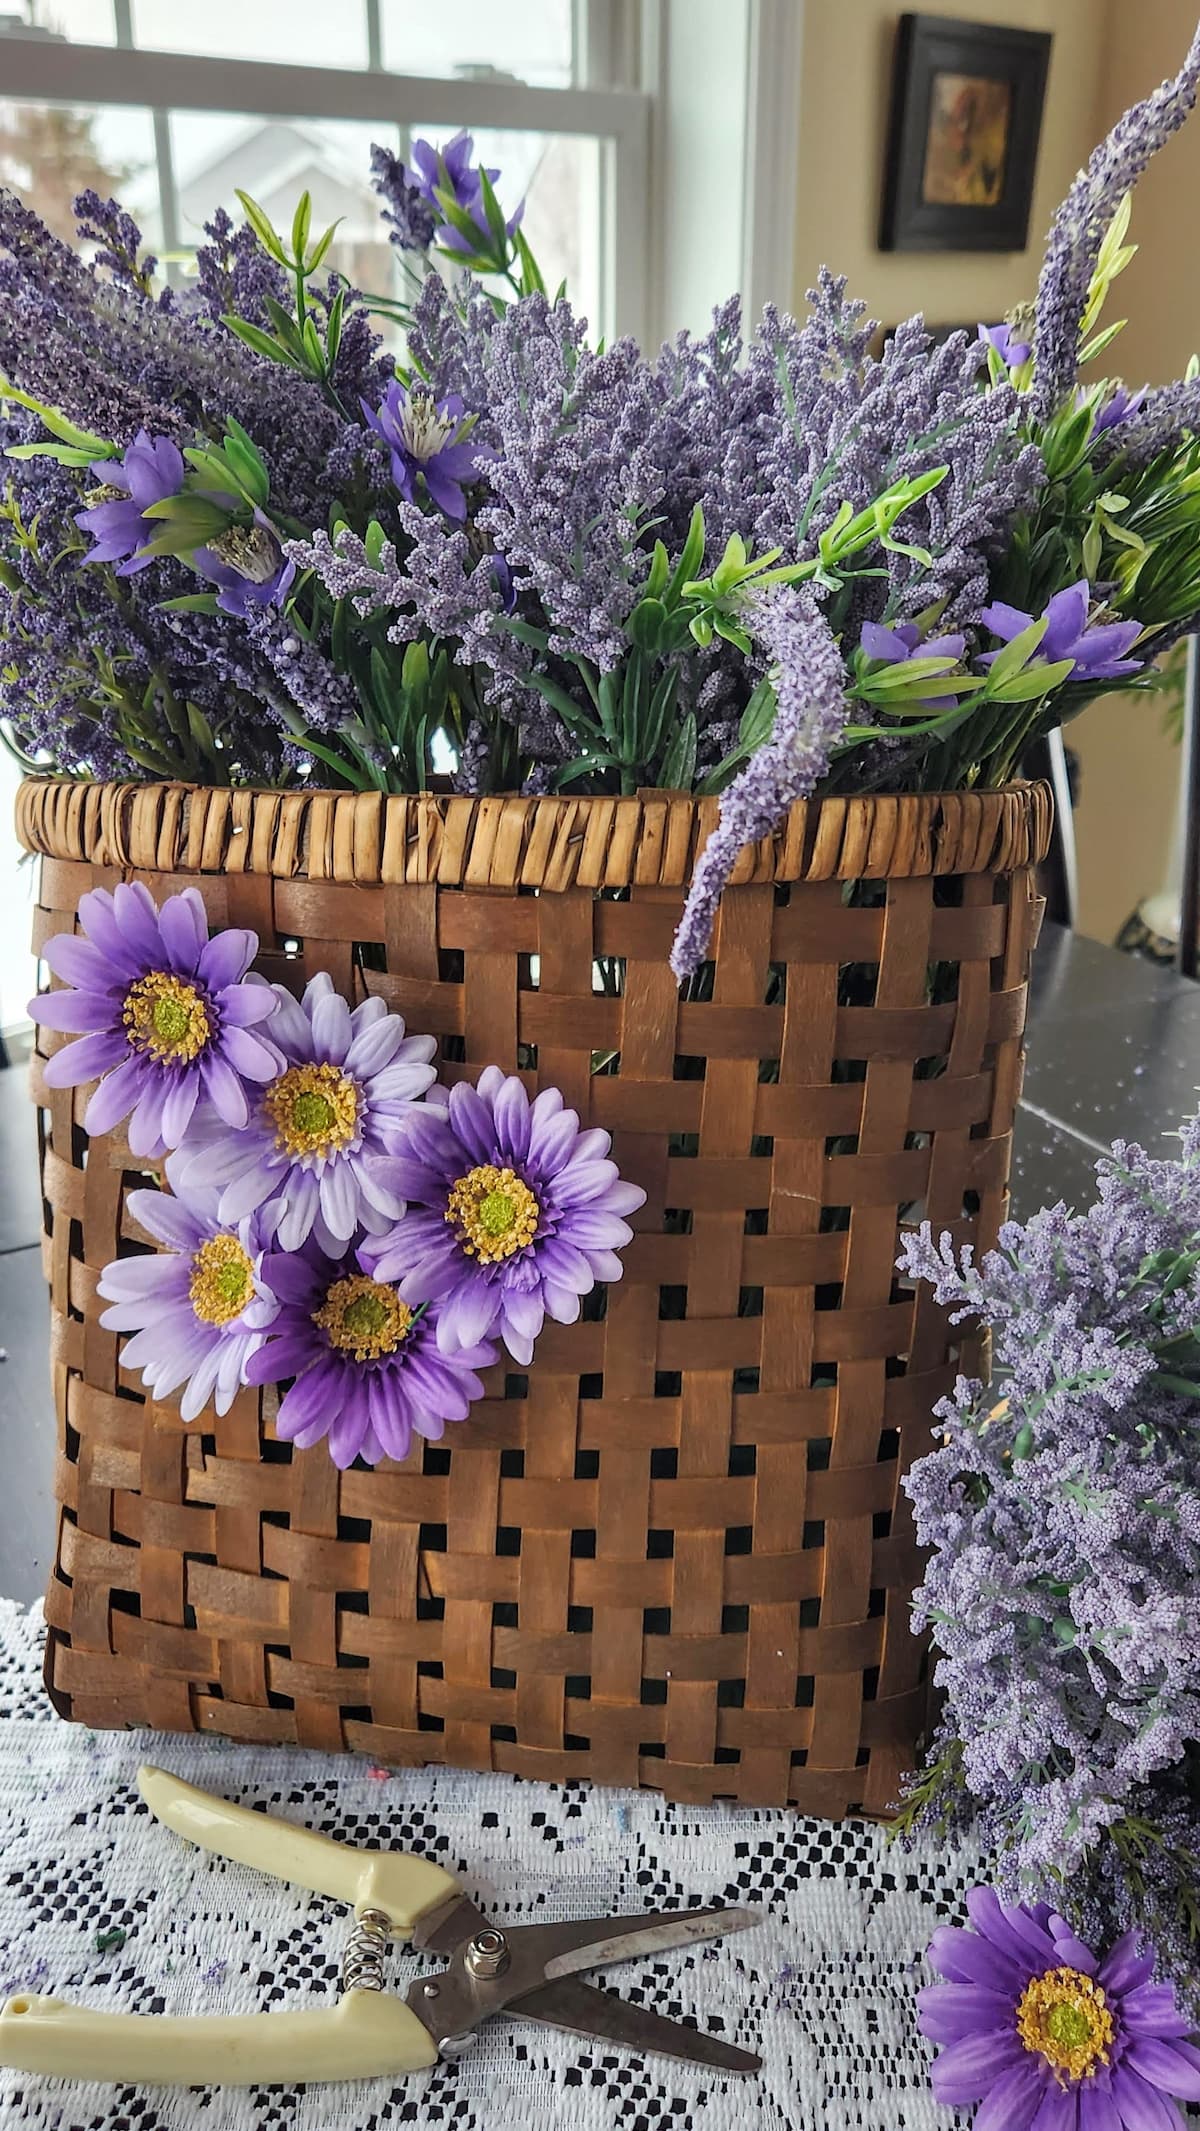 How to Make an Easy Flower Basket Using Faux Lavender